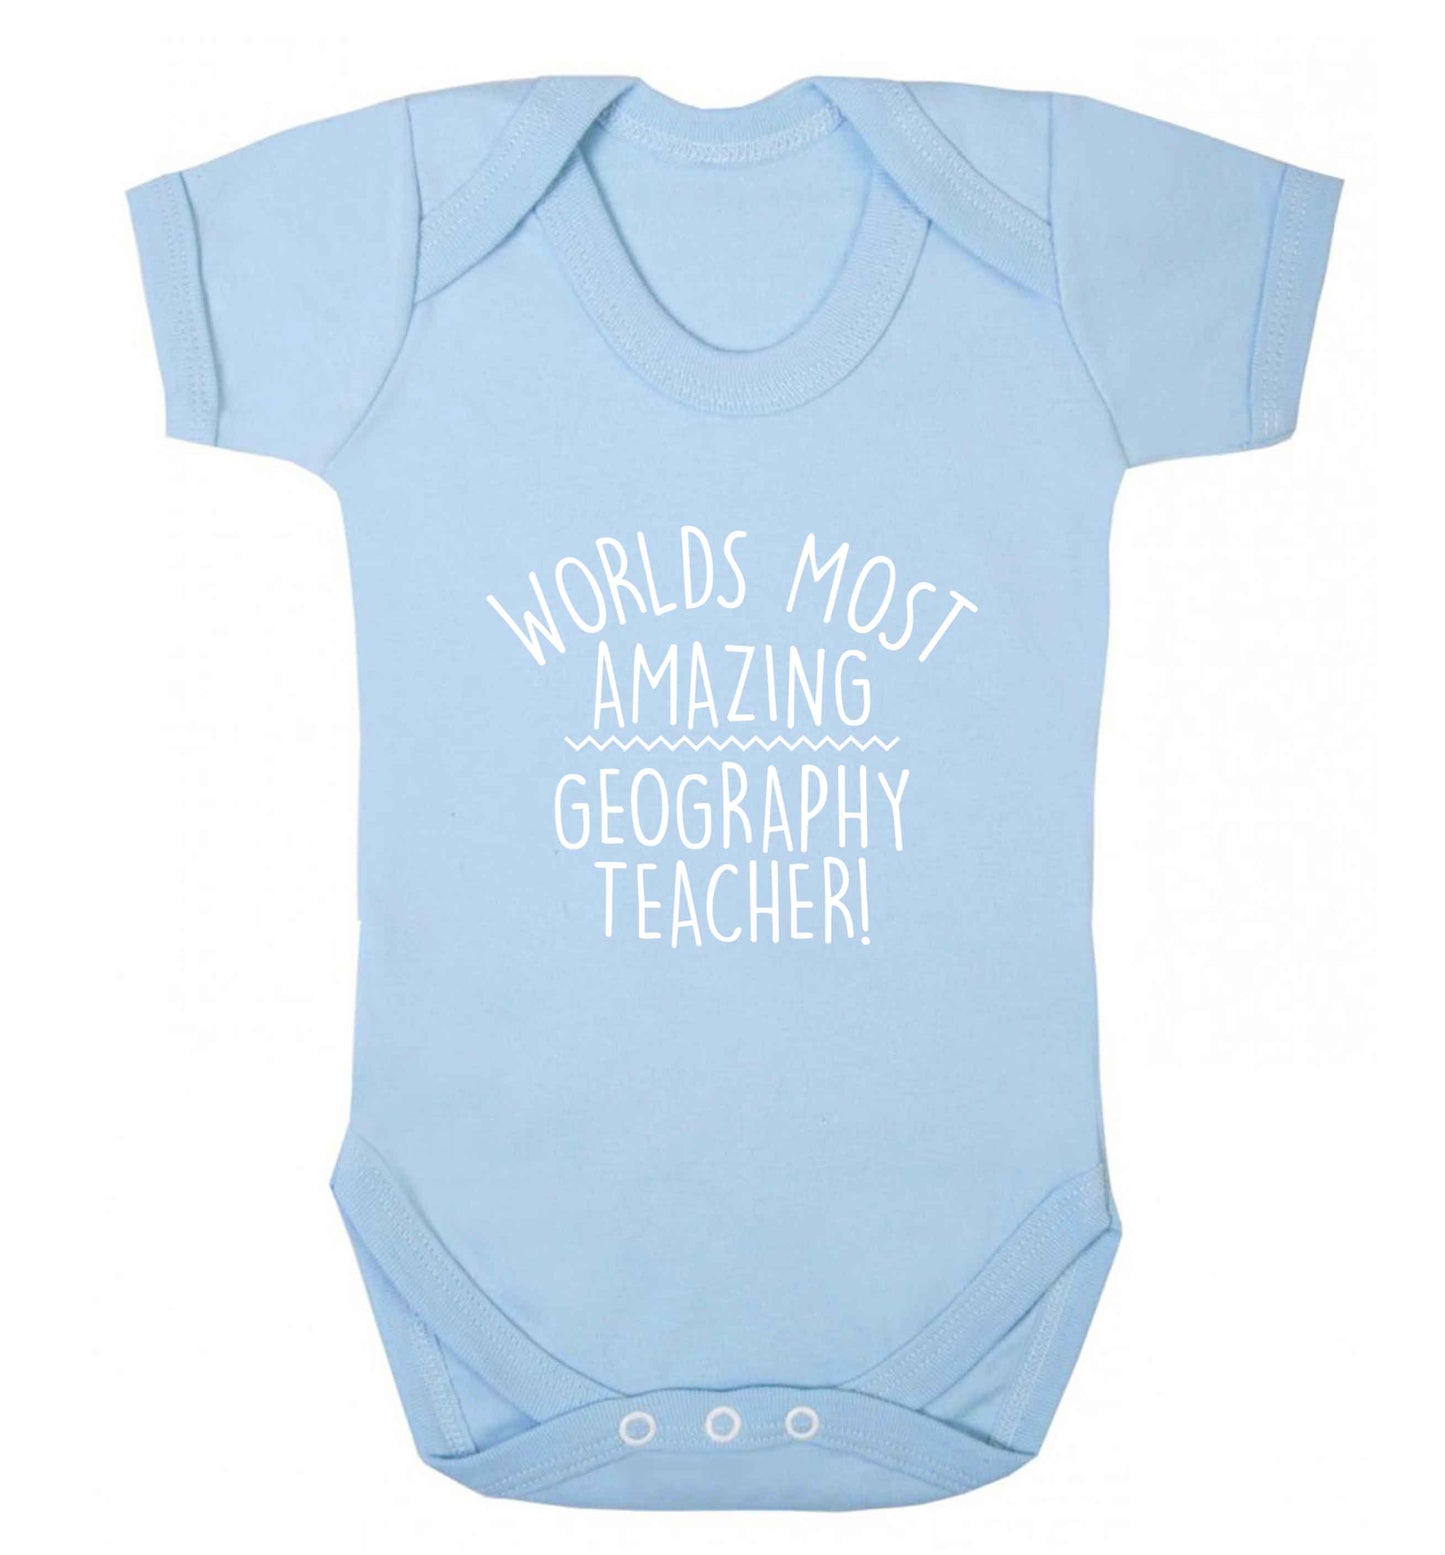 Worlds most amazing geography teacher baby vest pale blue 18-24 months